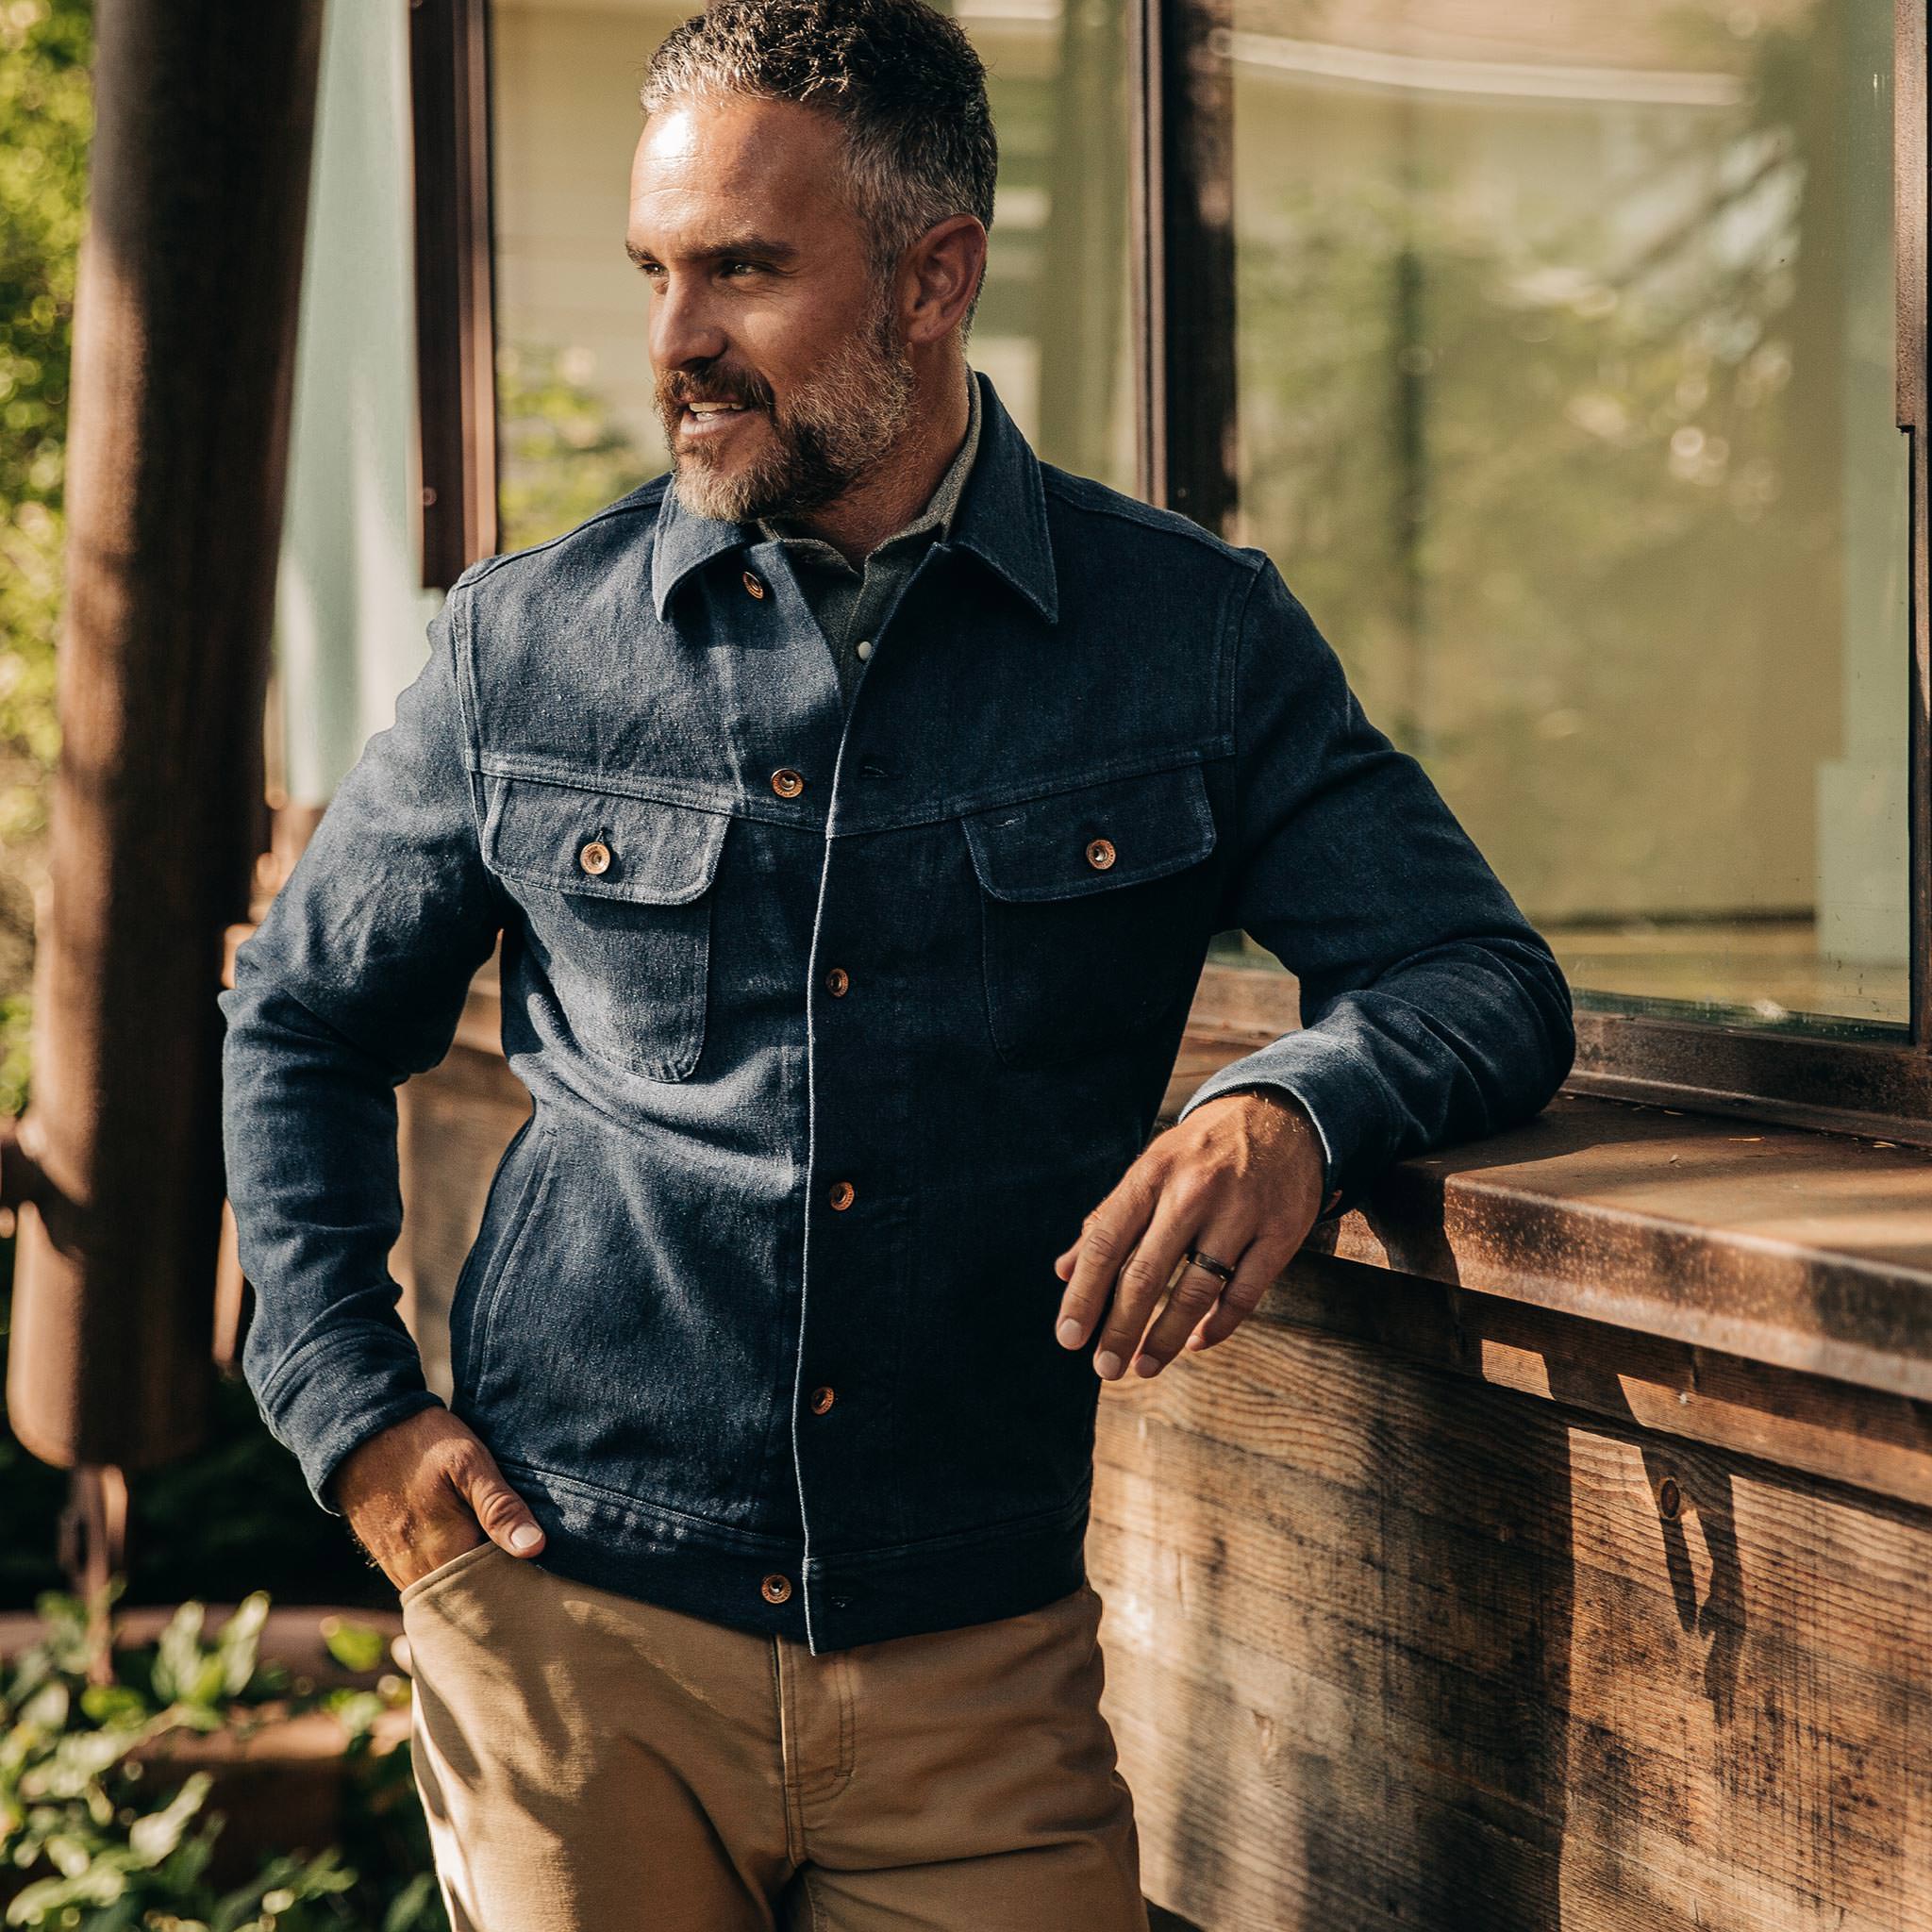 Pick up a Gorgeous New Denim Jacket in This Huckberry x Taylor Stitch  Collection - Men's Journal